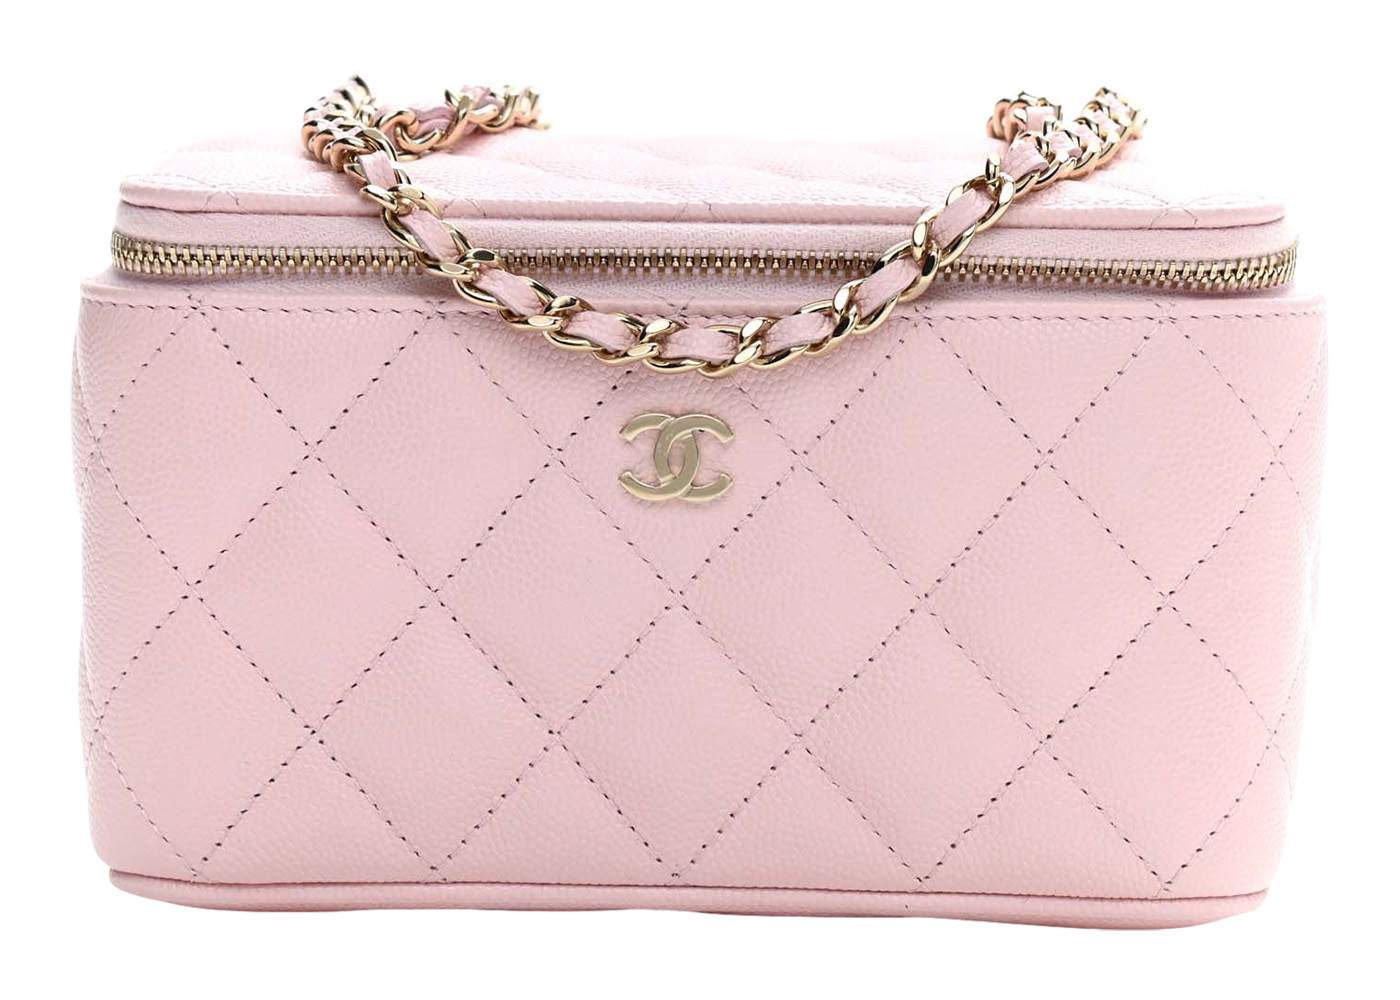 Chanel Vanity Case with Chain Pink (AP2625-B07641-NG750) in 